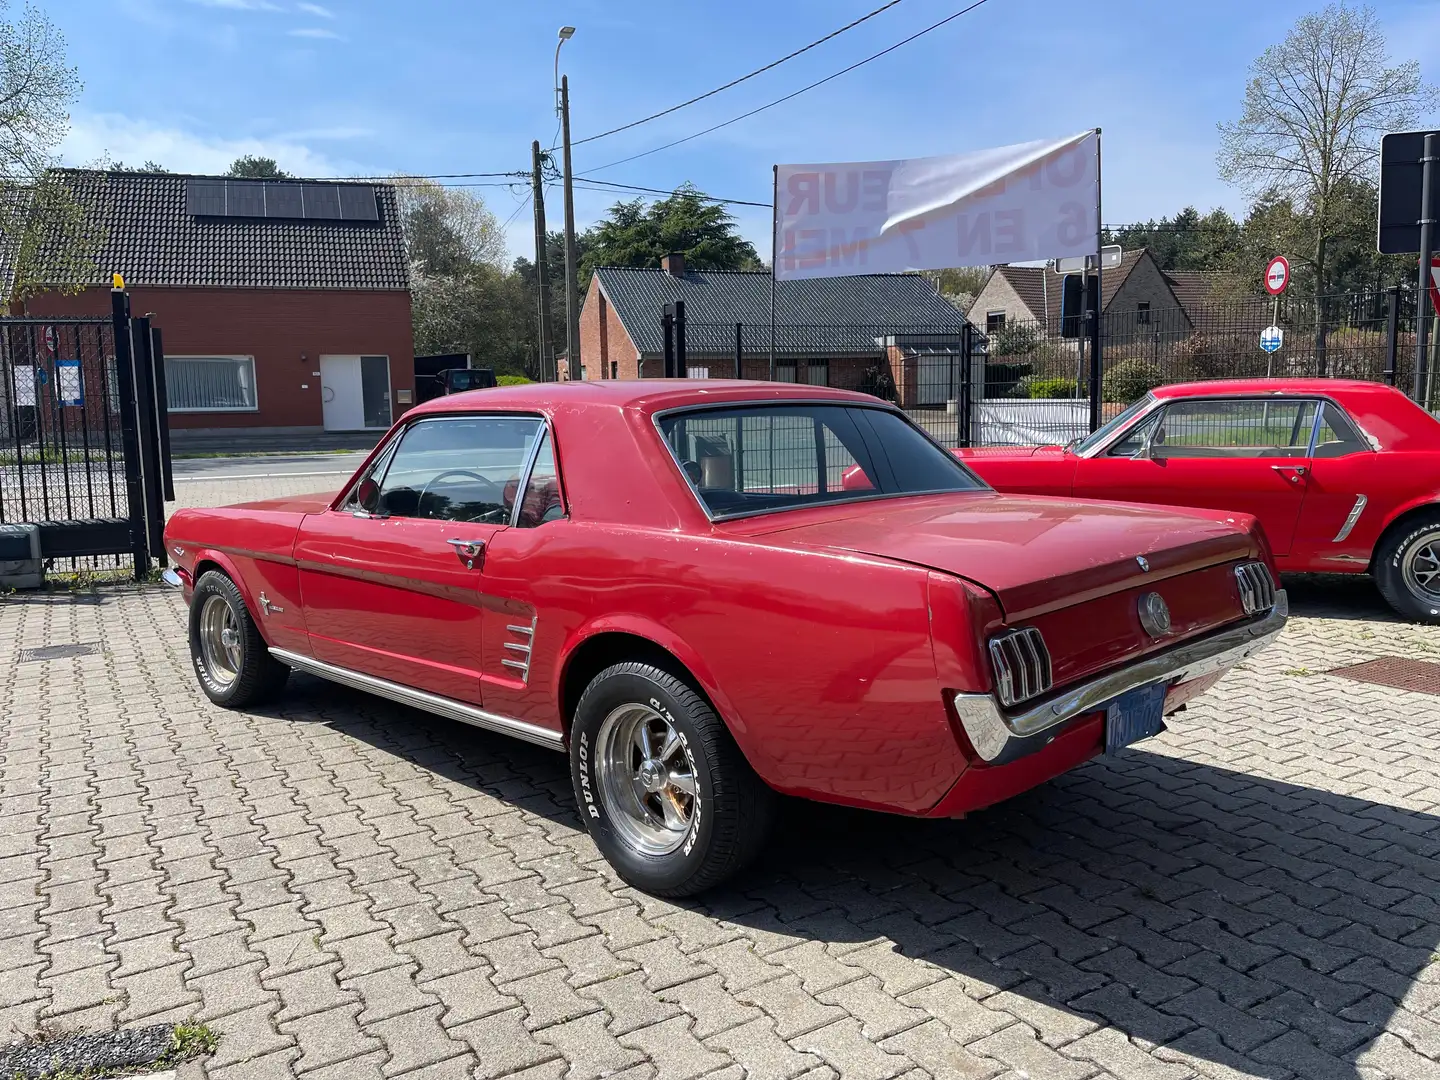 Ford Mustang "OPENHOUSE 25&26 May" Rojo - 2